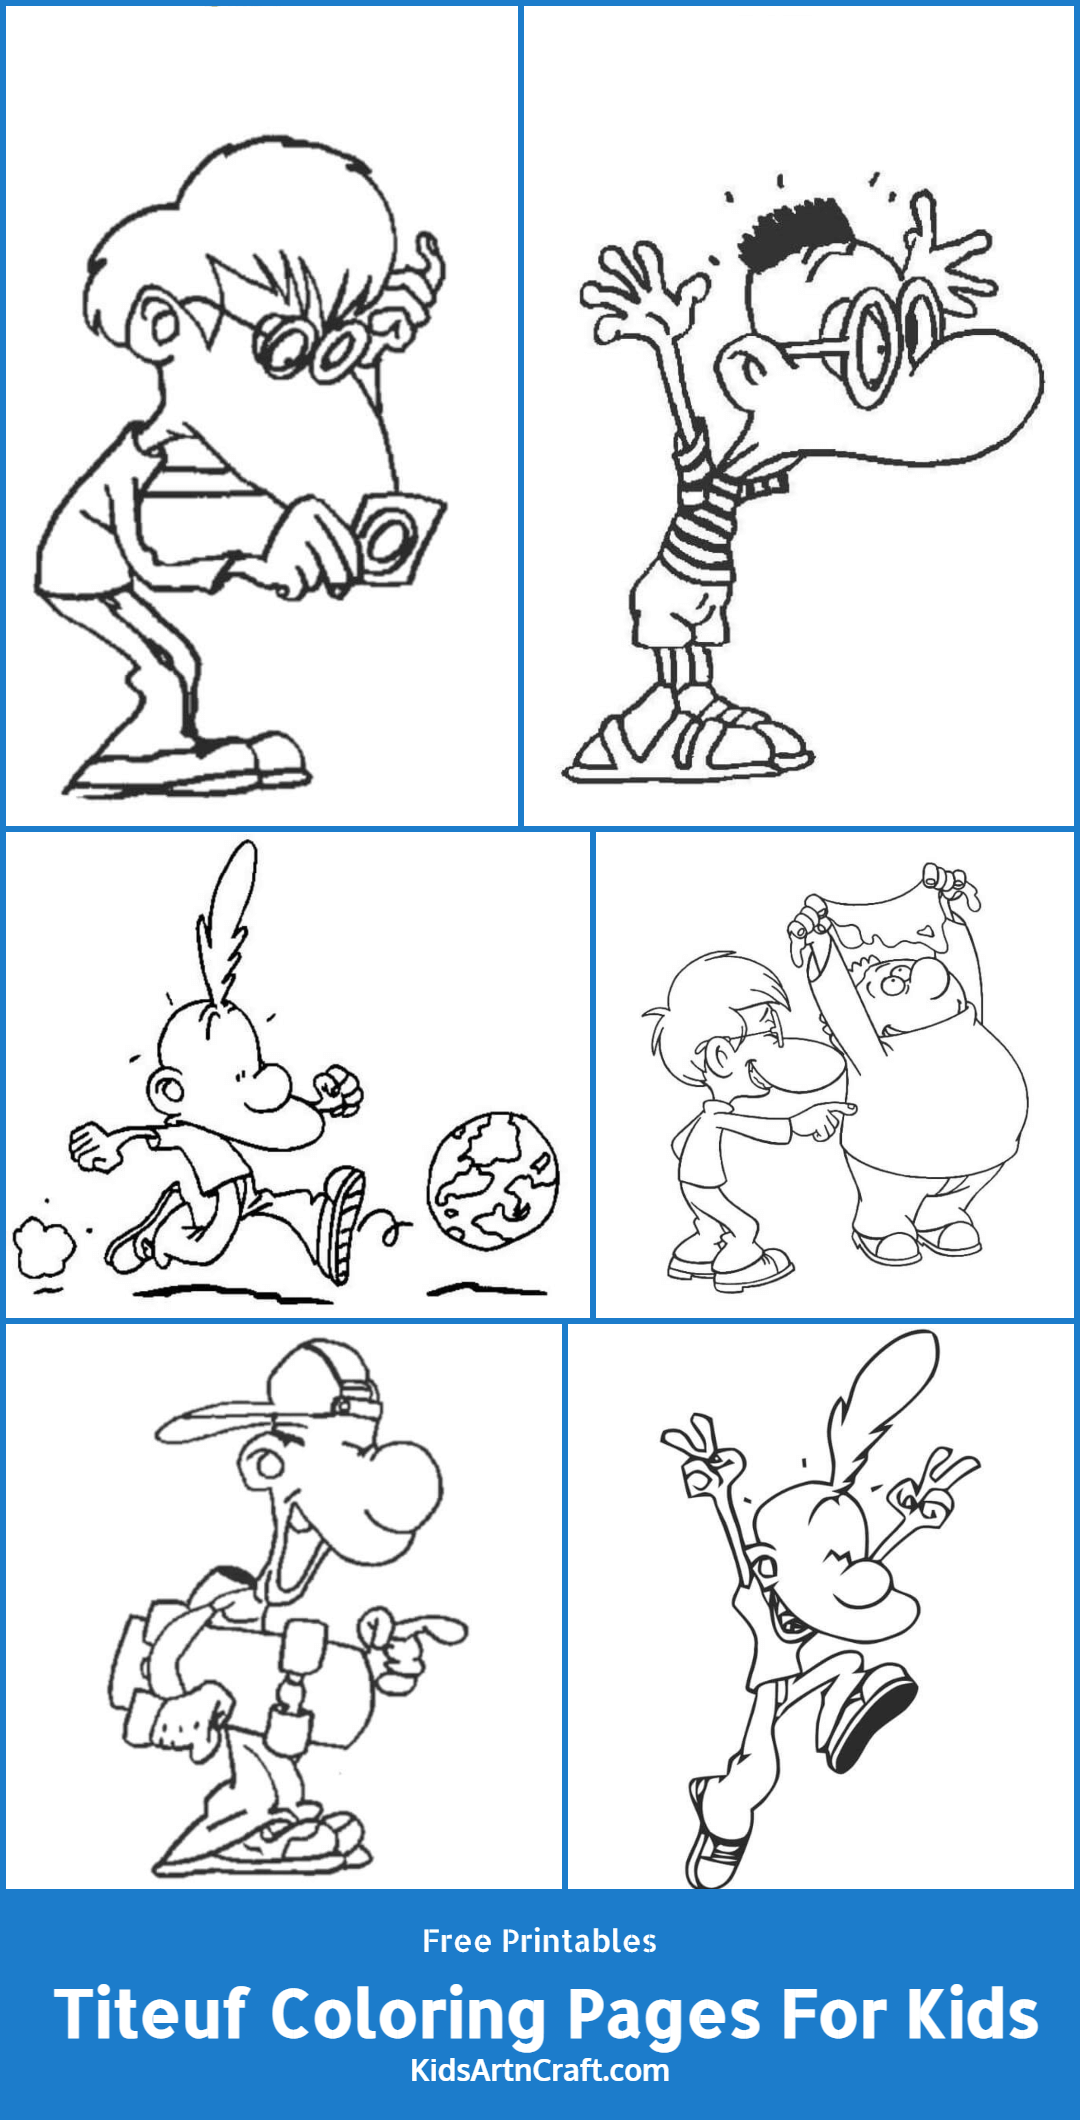 Titeuf Coloring Pages For Kids – Free Printables